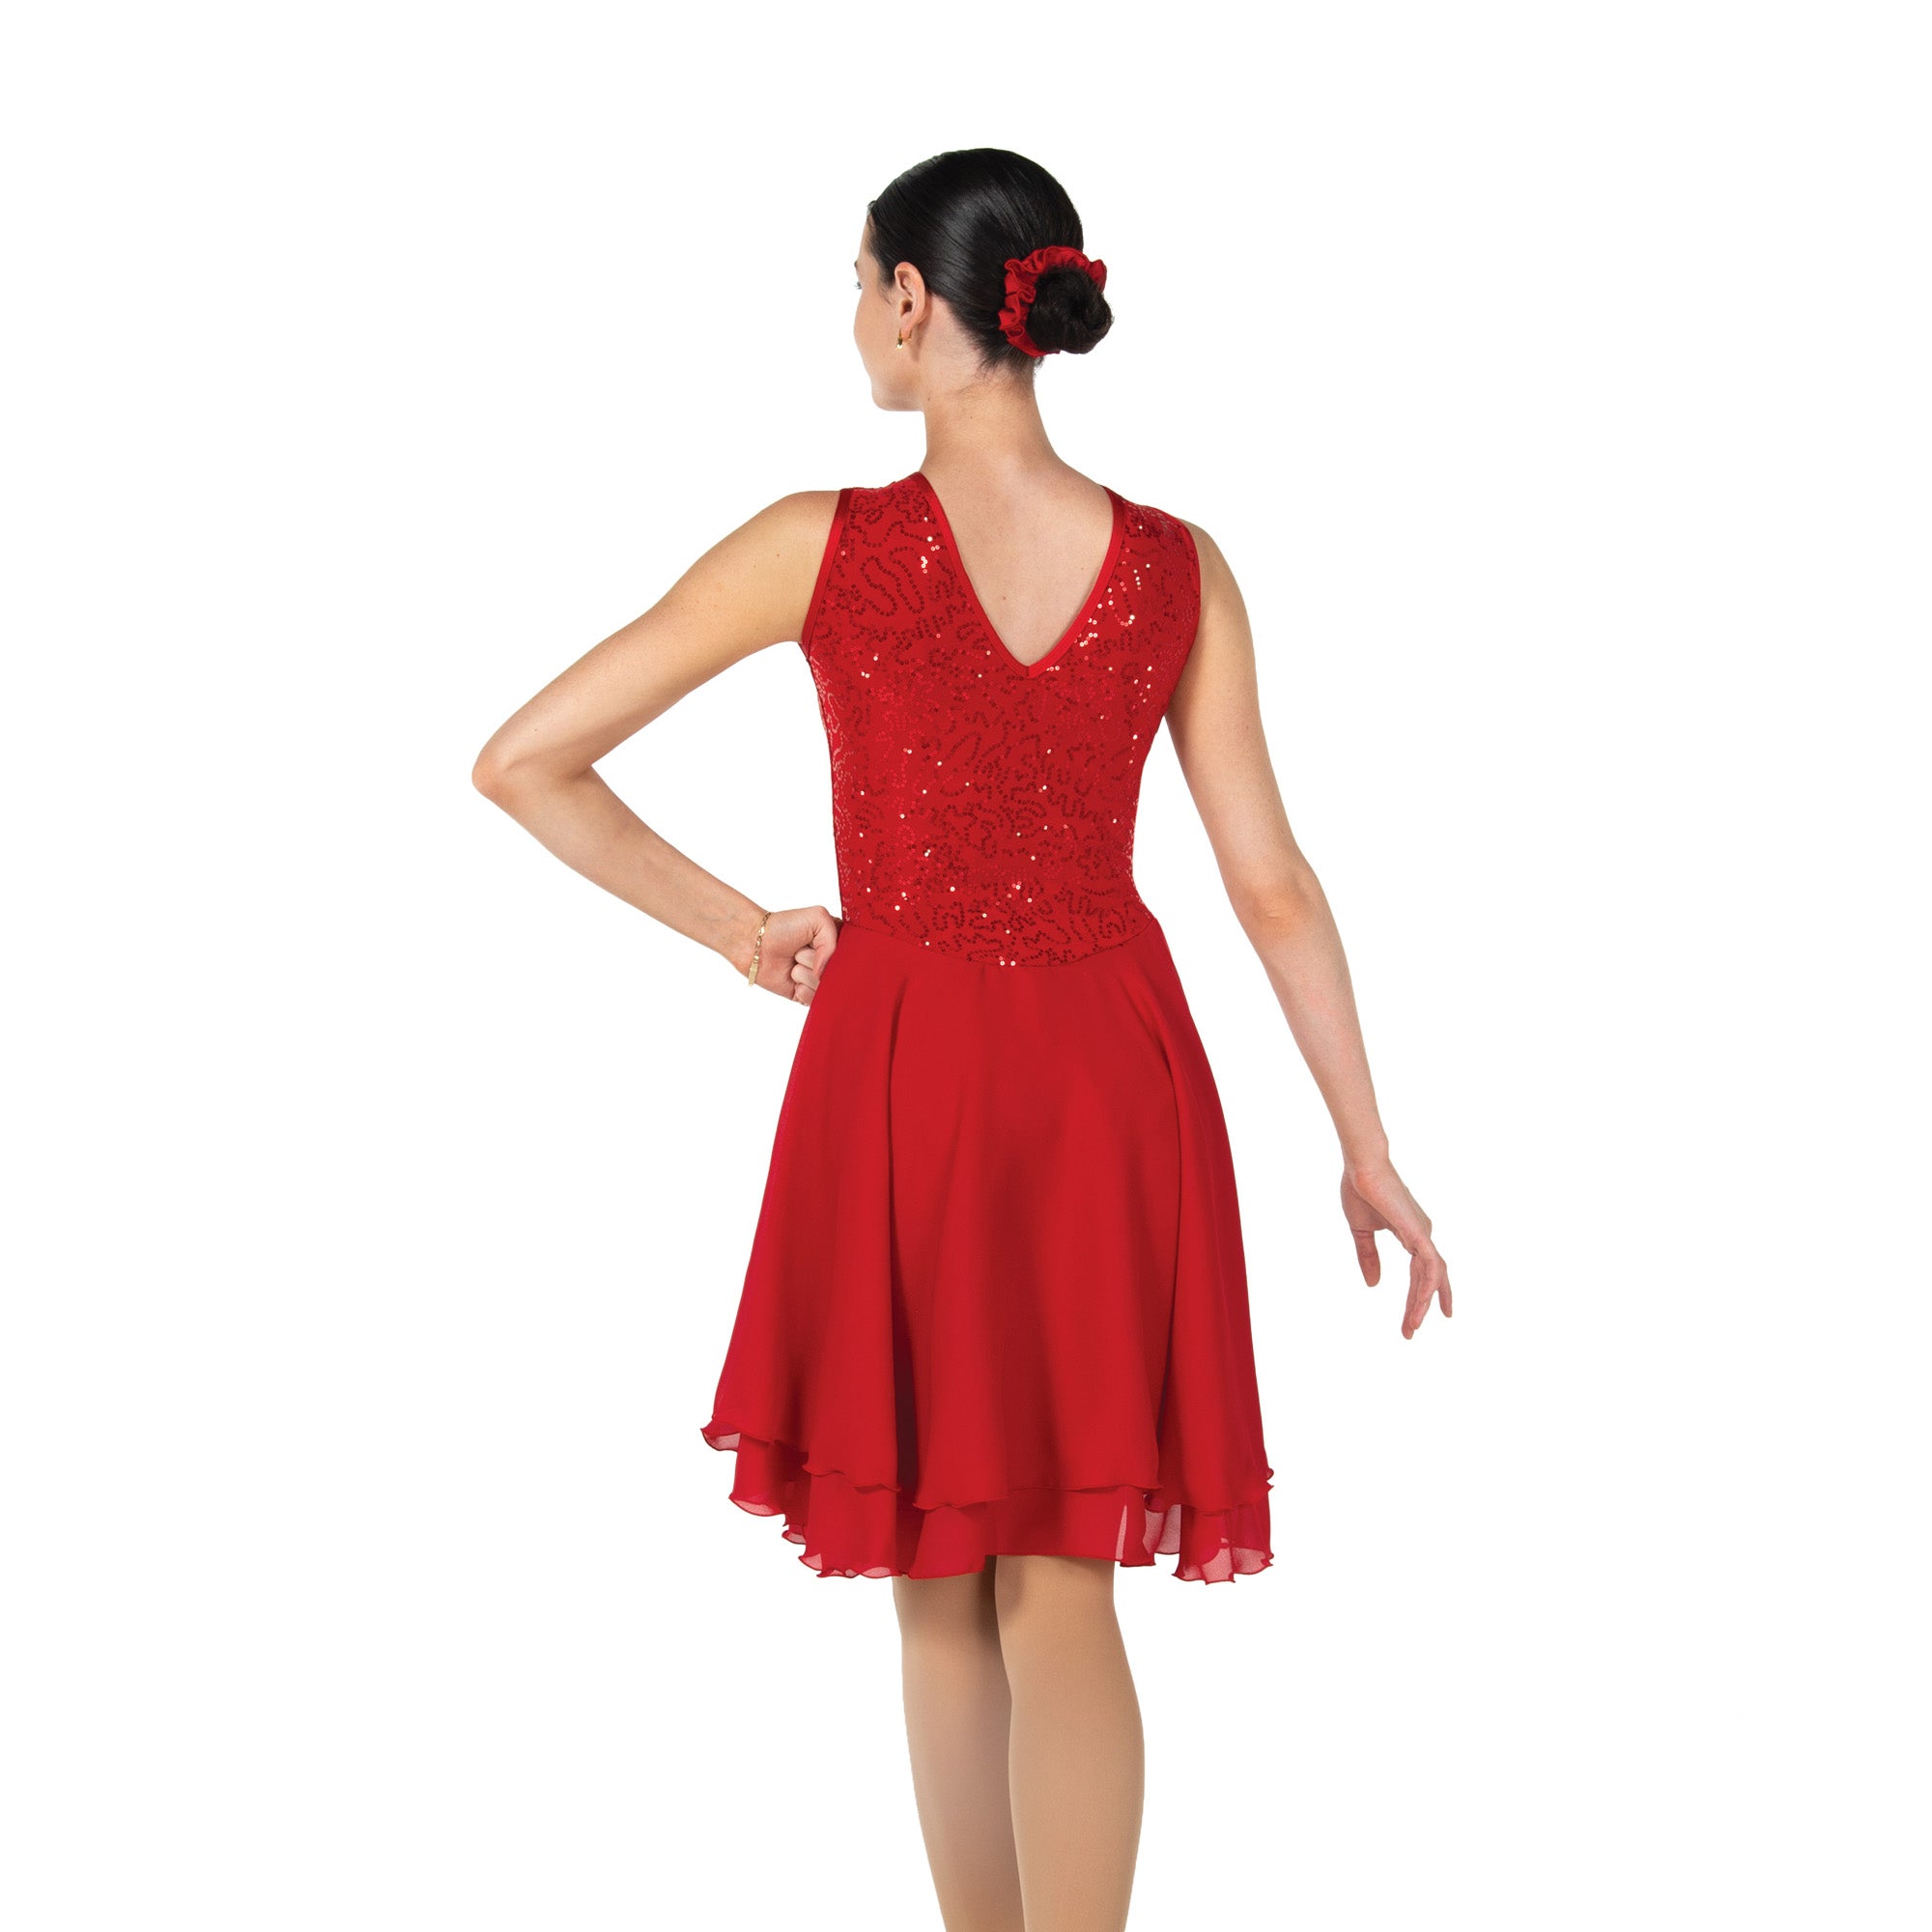 111 Dancerella Dance Dress in Flame Red by Jerry's